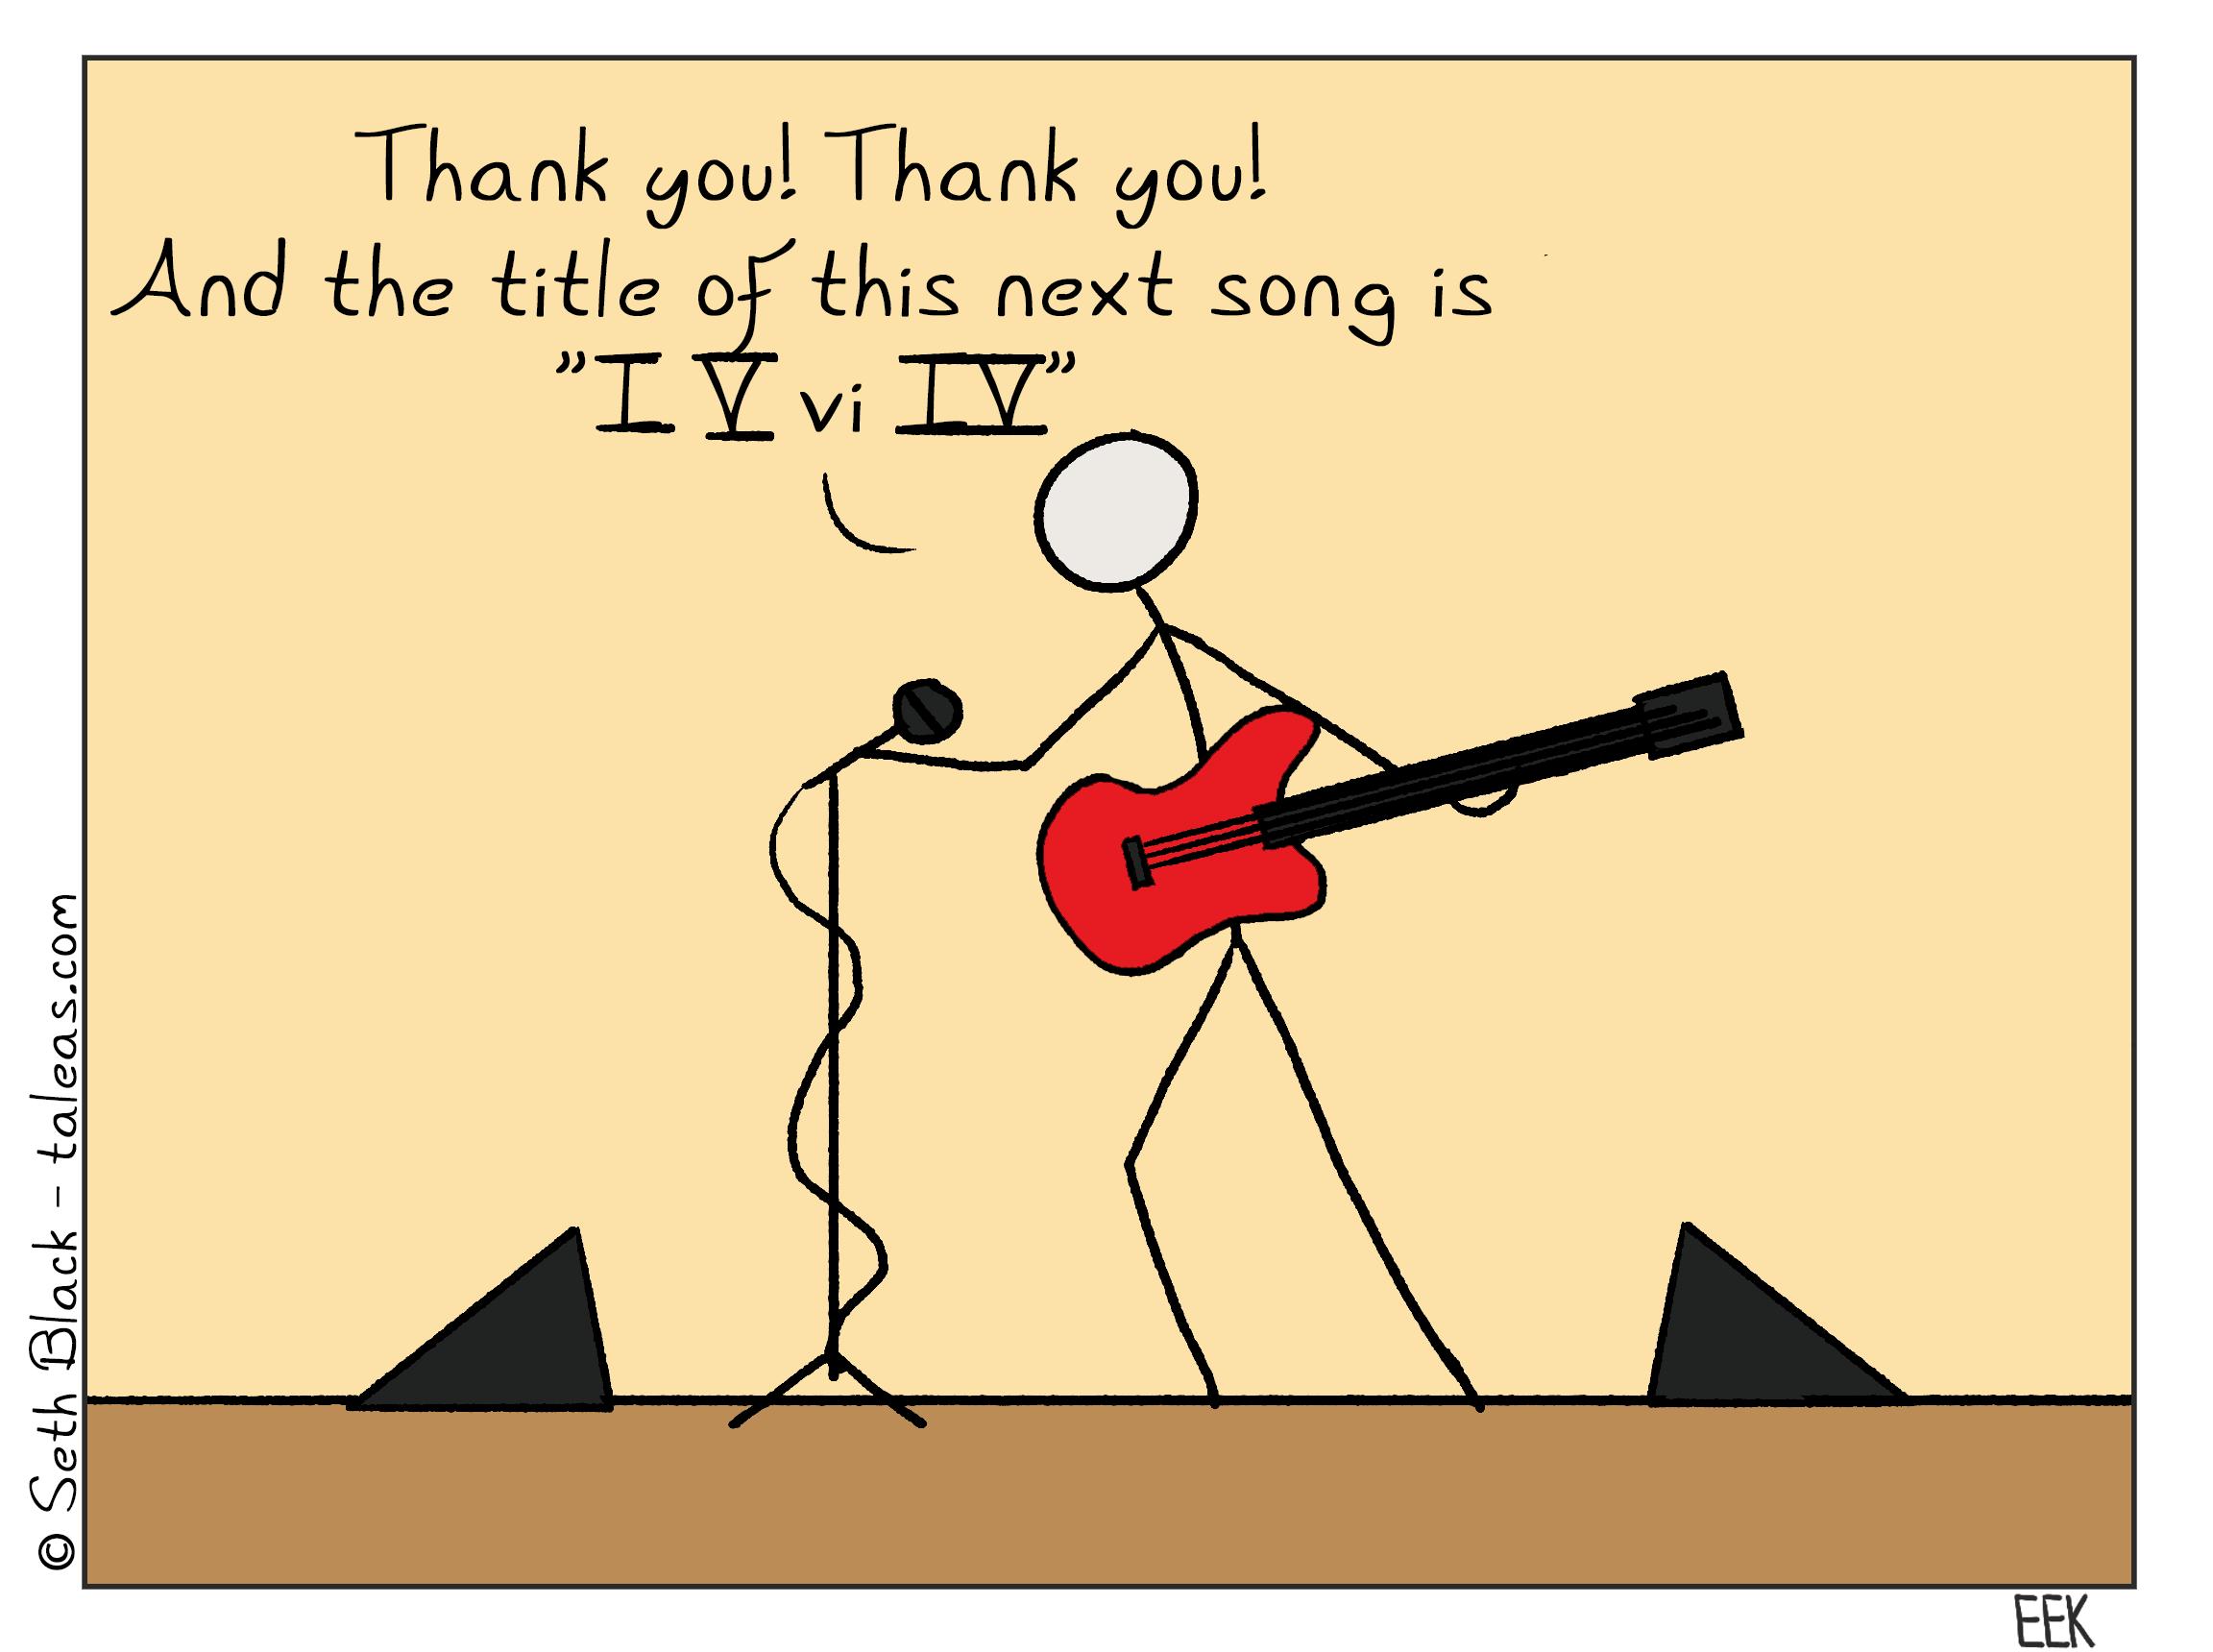 A stick figure is holding a guitar in front of a microphone on stage. "Thank you! Thank you! And the title of this next song is, I V vi IV"